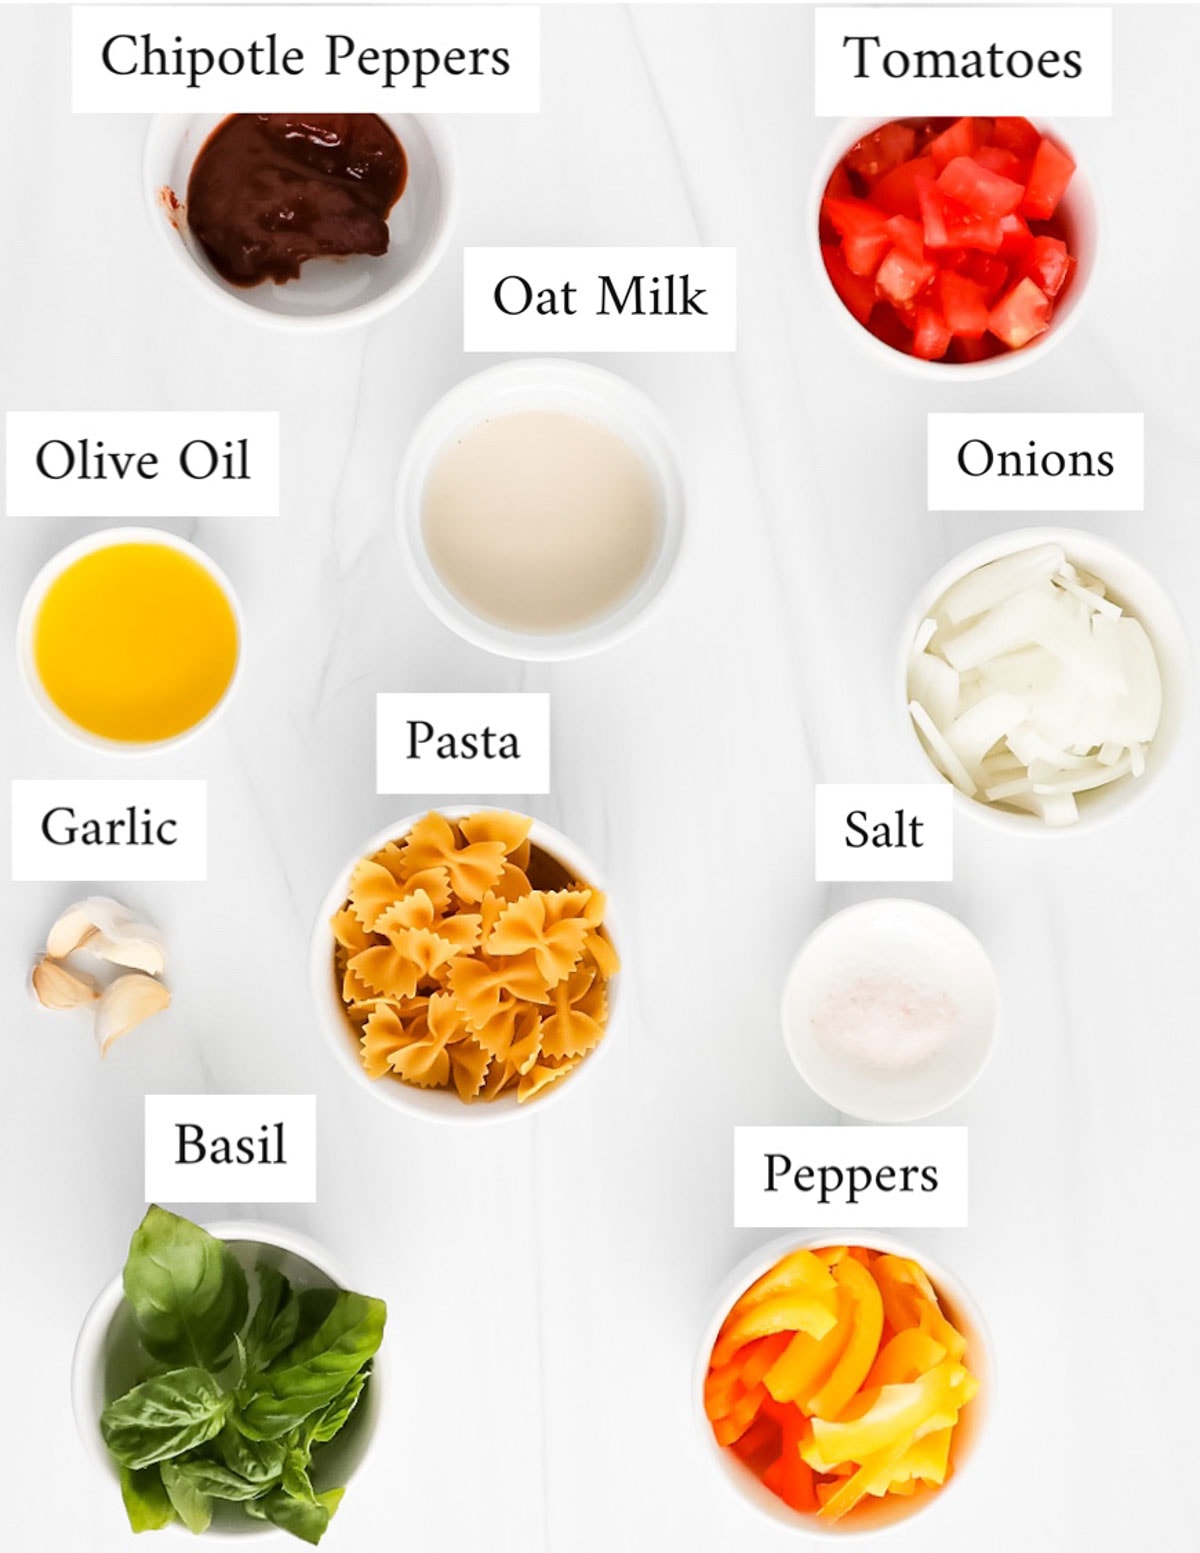 Labeled ingredients in small white bowls including: chipotle peppers, tomatoes, oat milk, olive oil, onions, pasta, garlic, salt, basil, peppers.